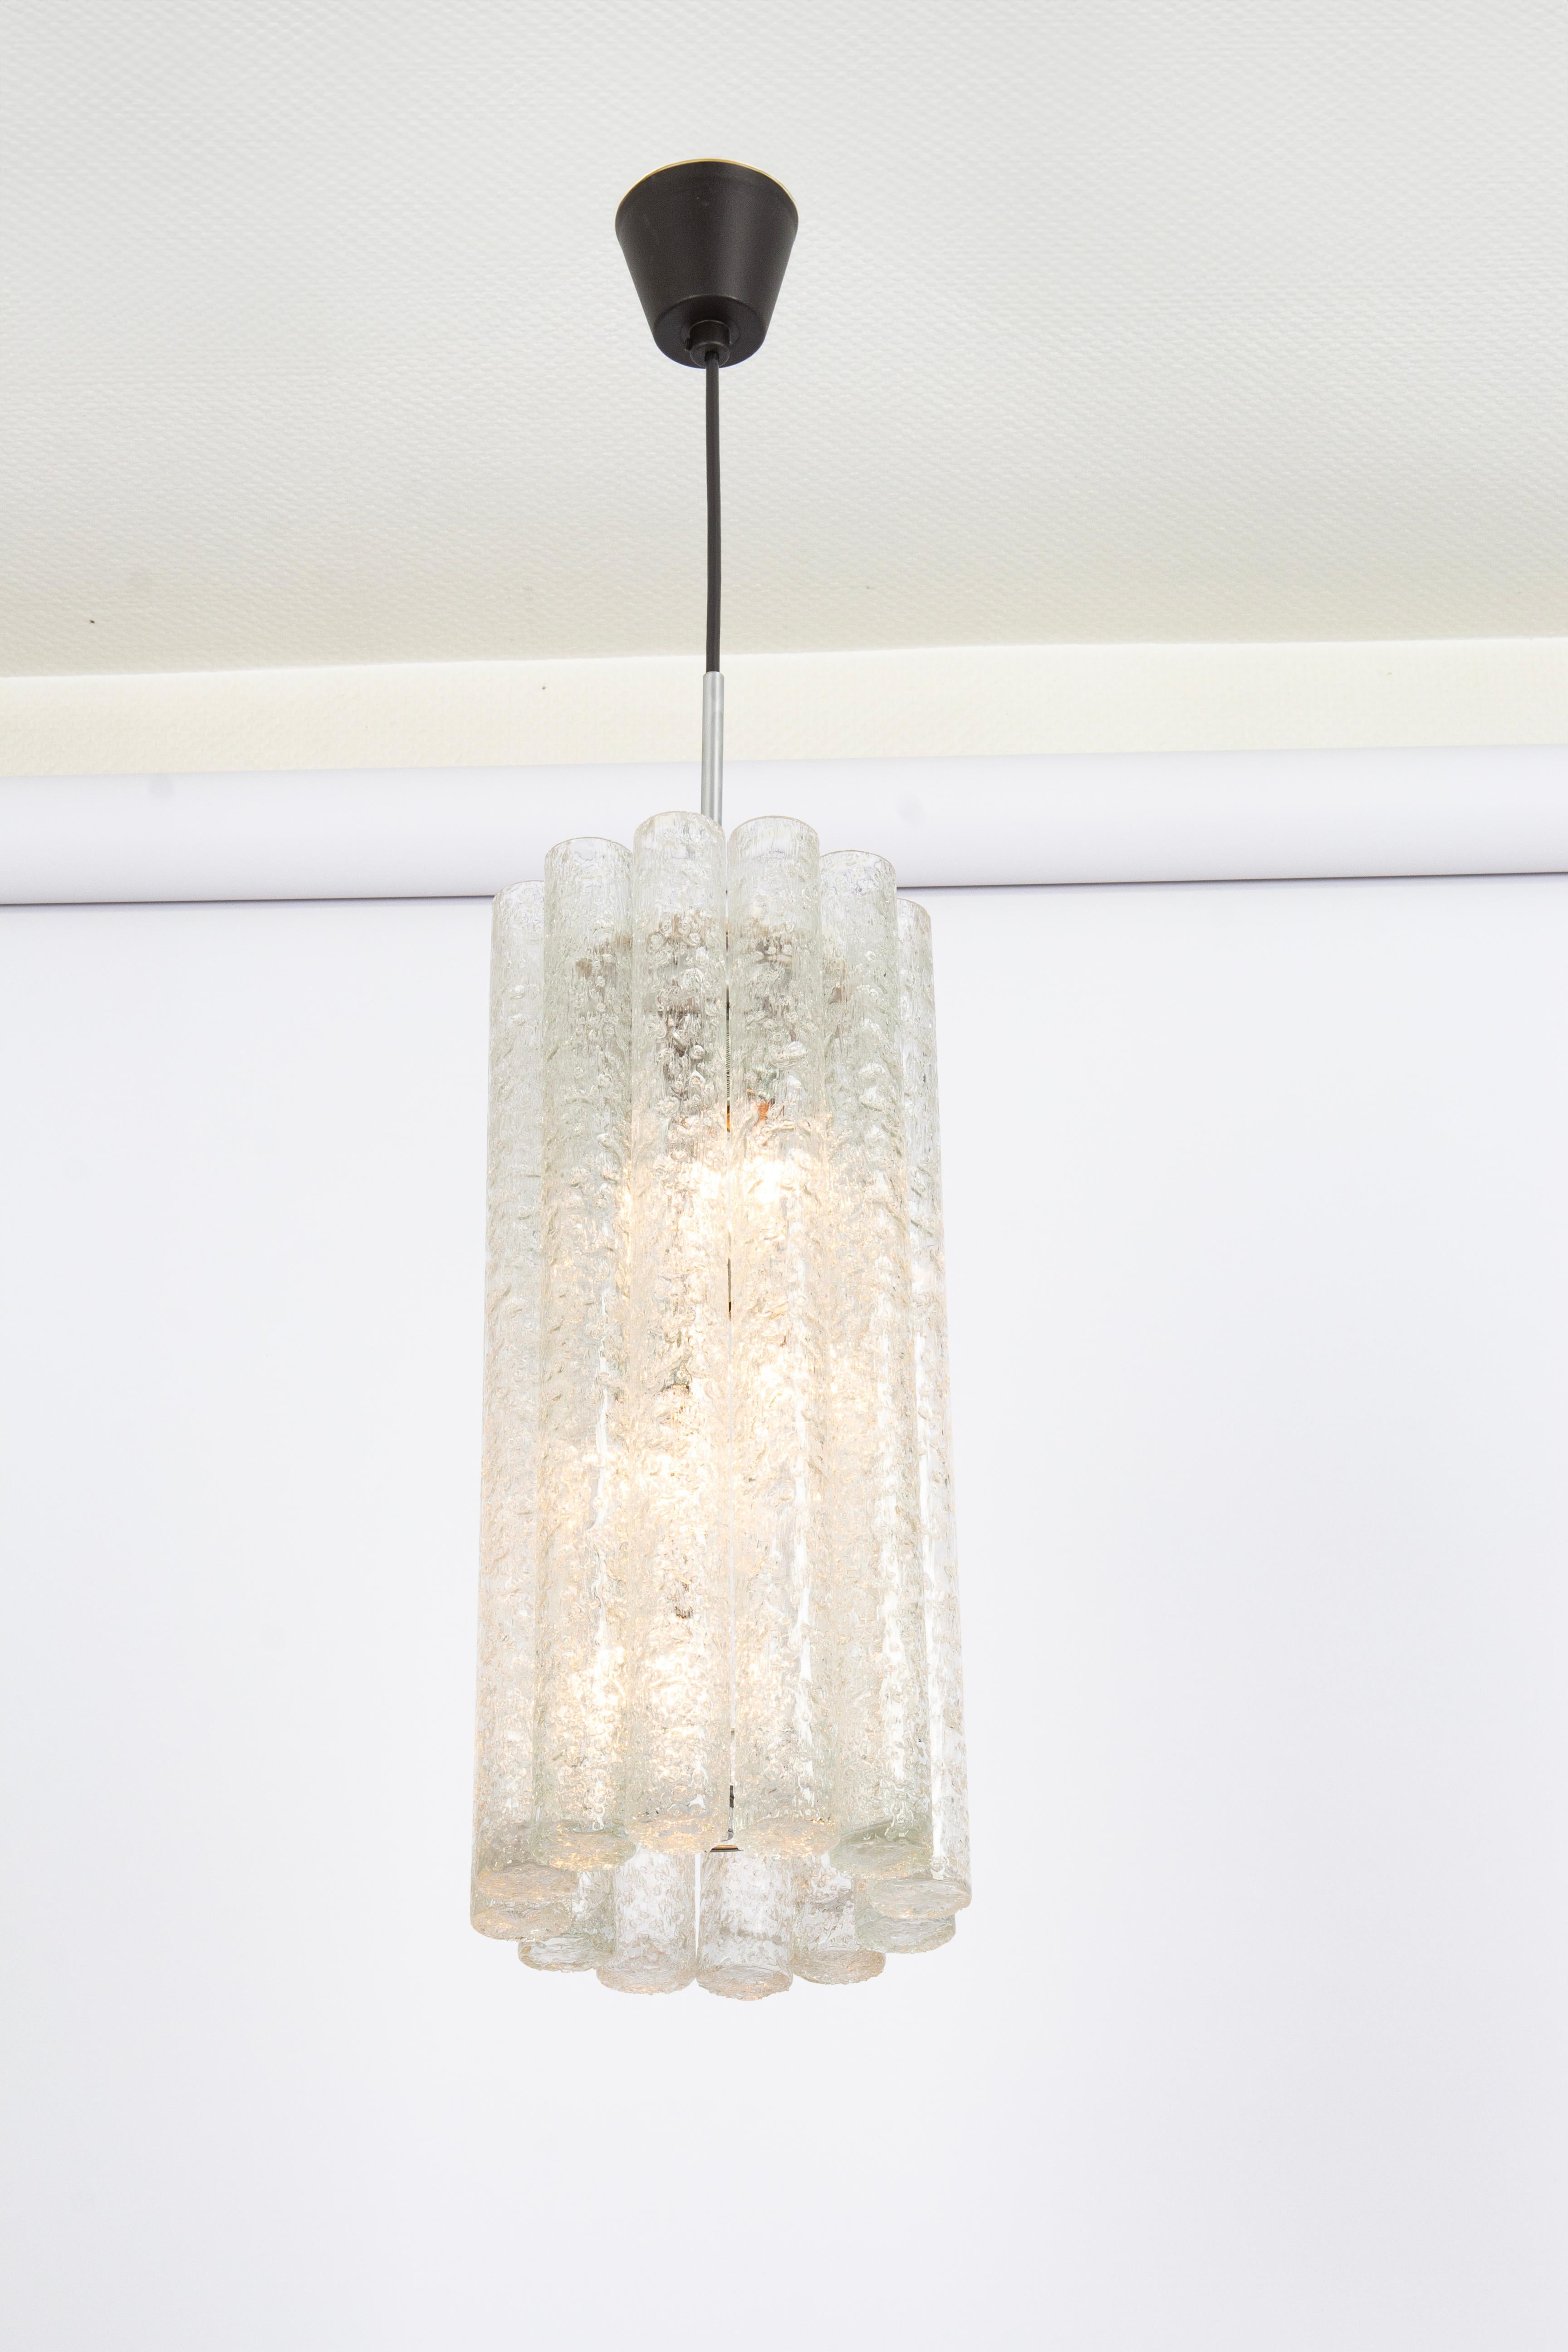 1 of 6 Large Murano Tubes Pendant Lights by Doria, 1970s For Sale 2